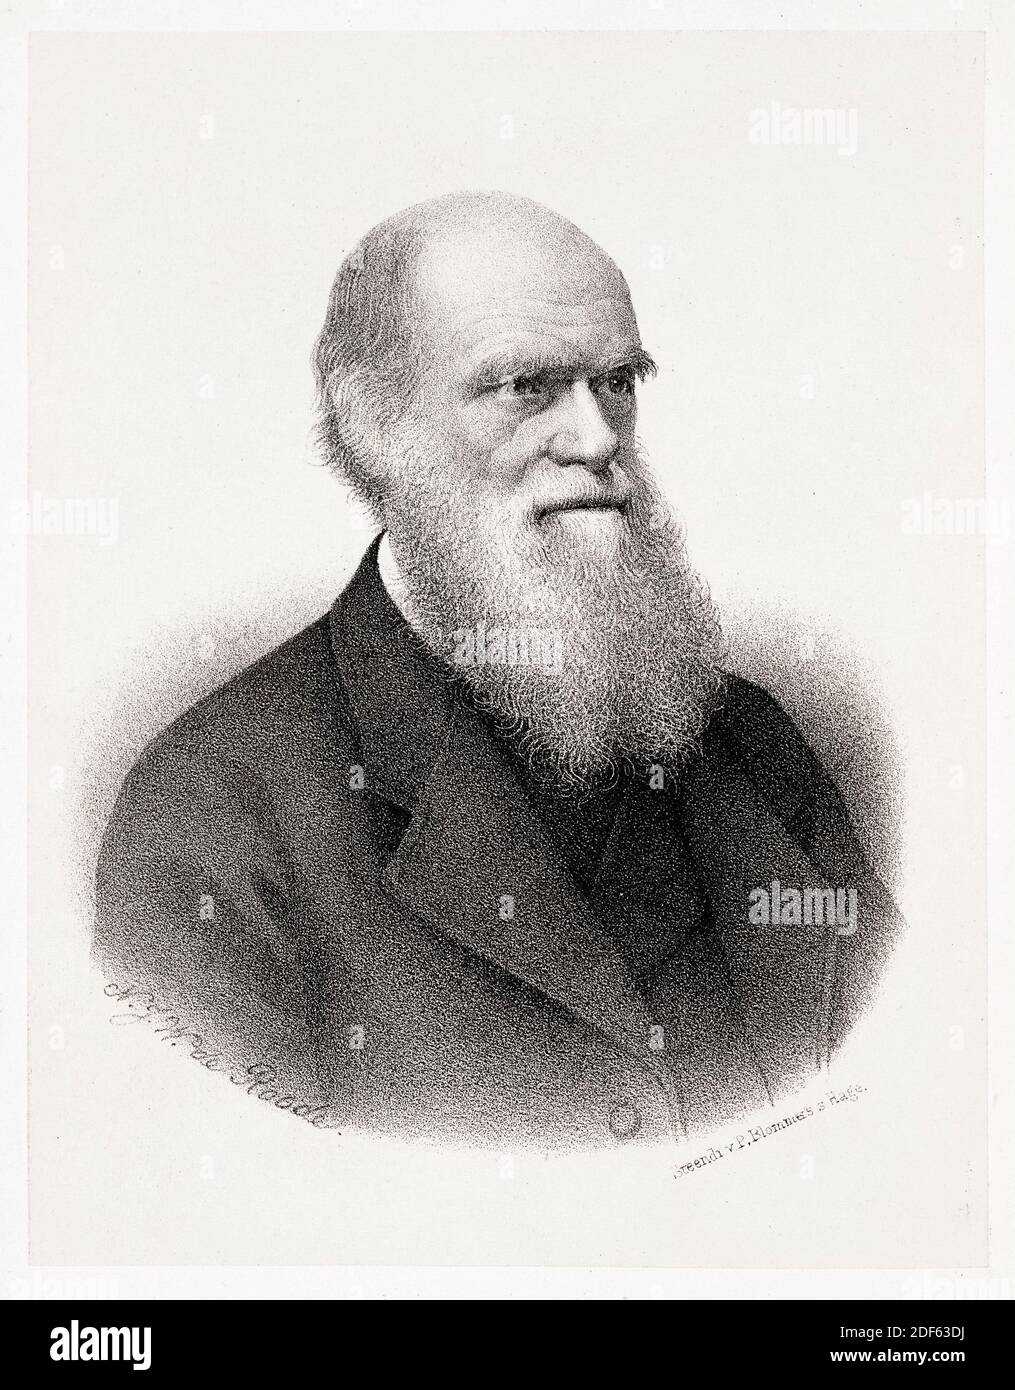 English naturalist, Charles Darwin (1809-1882), portrait engraving by HJW de Roode, 1876 Stock Photo